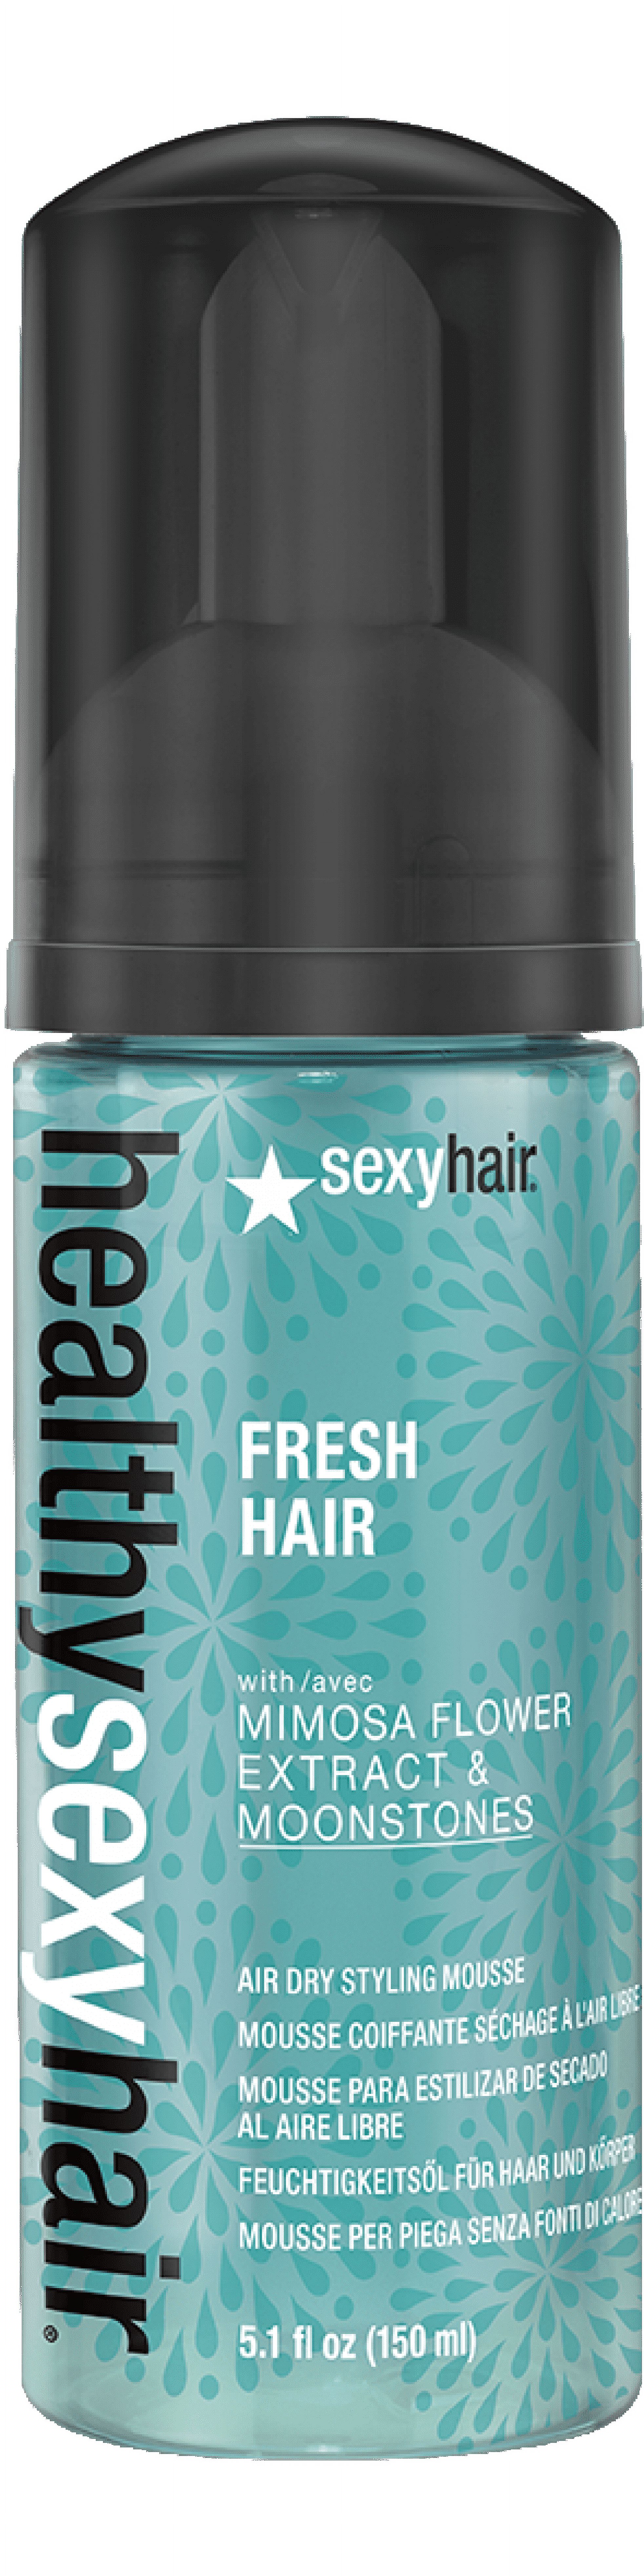 Healthy Fresh Hair Air Dry Styling Mousse 5.1oz/150ml - image 1 of 1